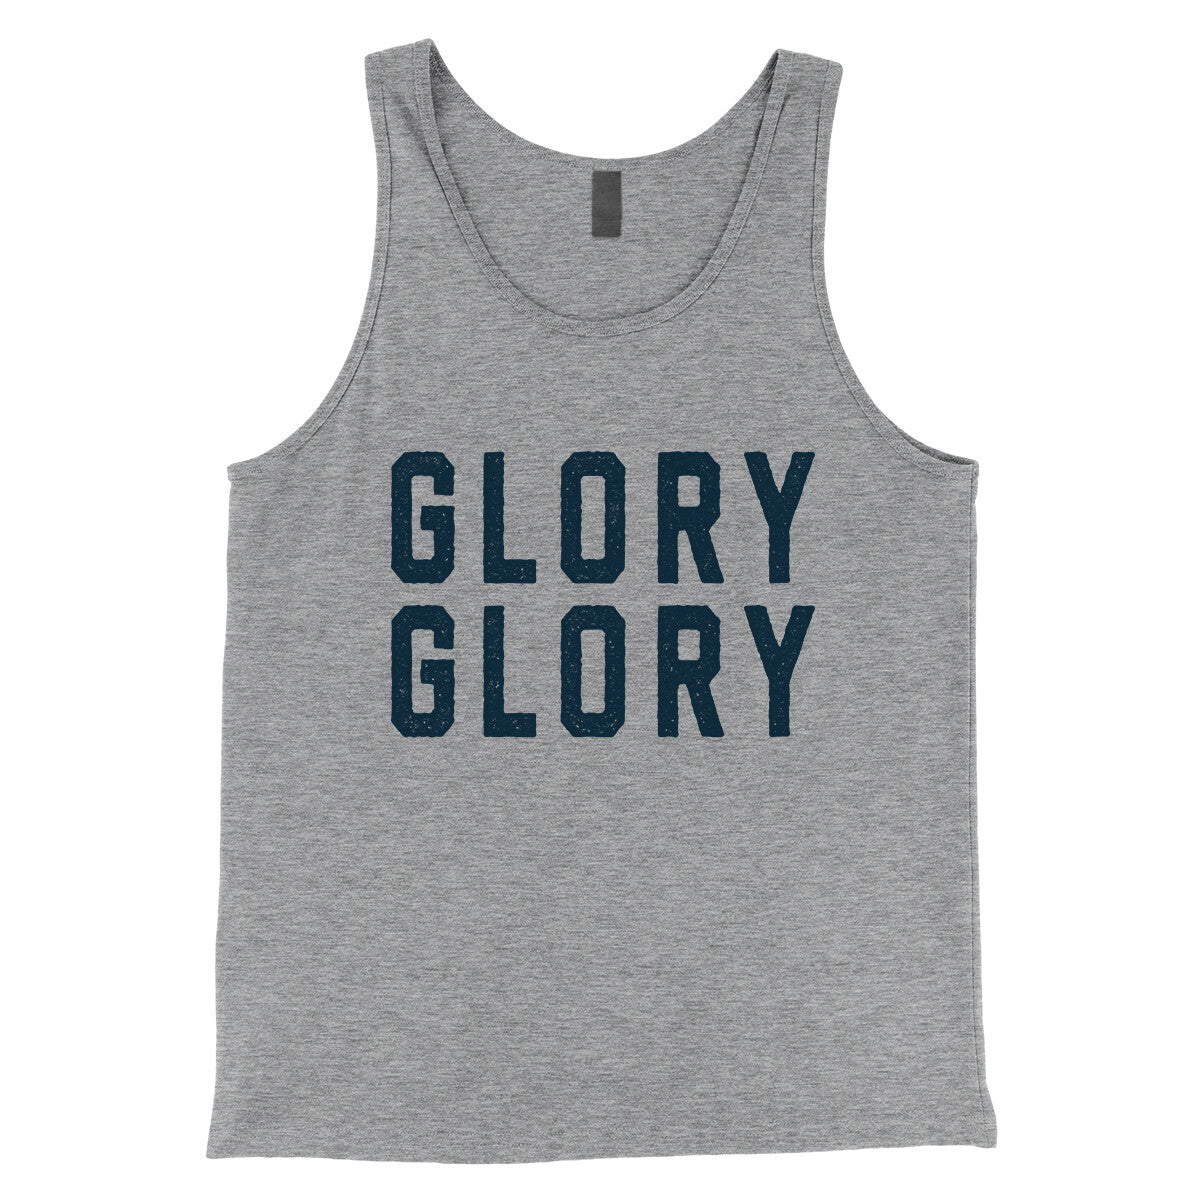 Glory Glory in Athletic Heather Color